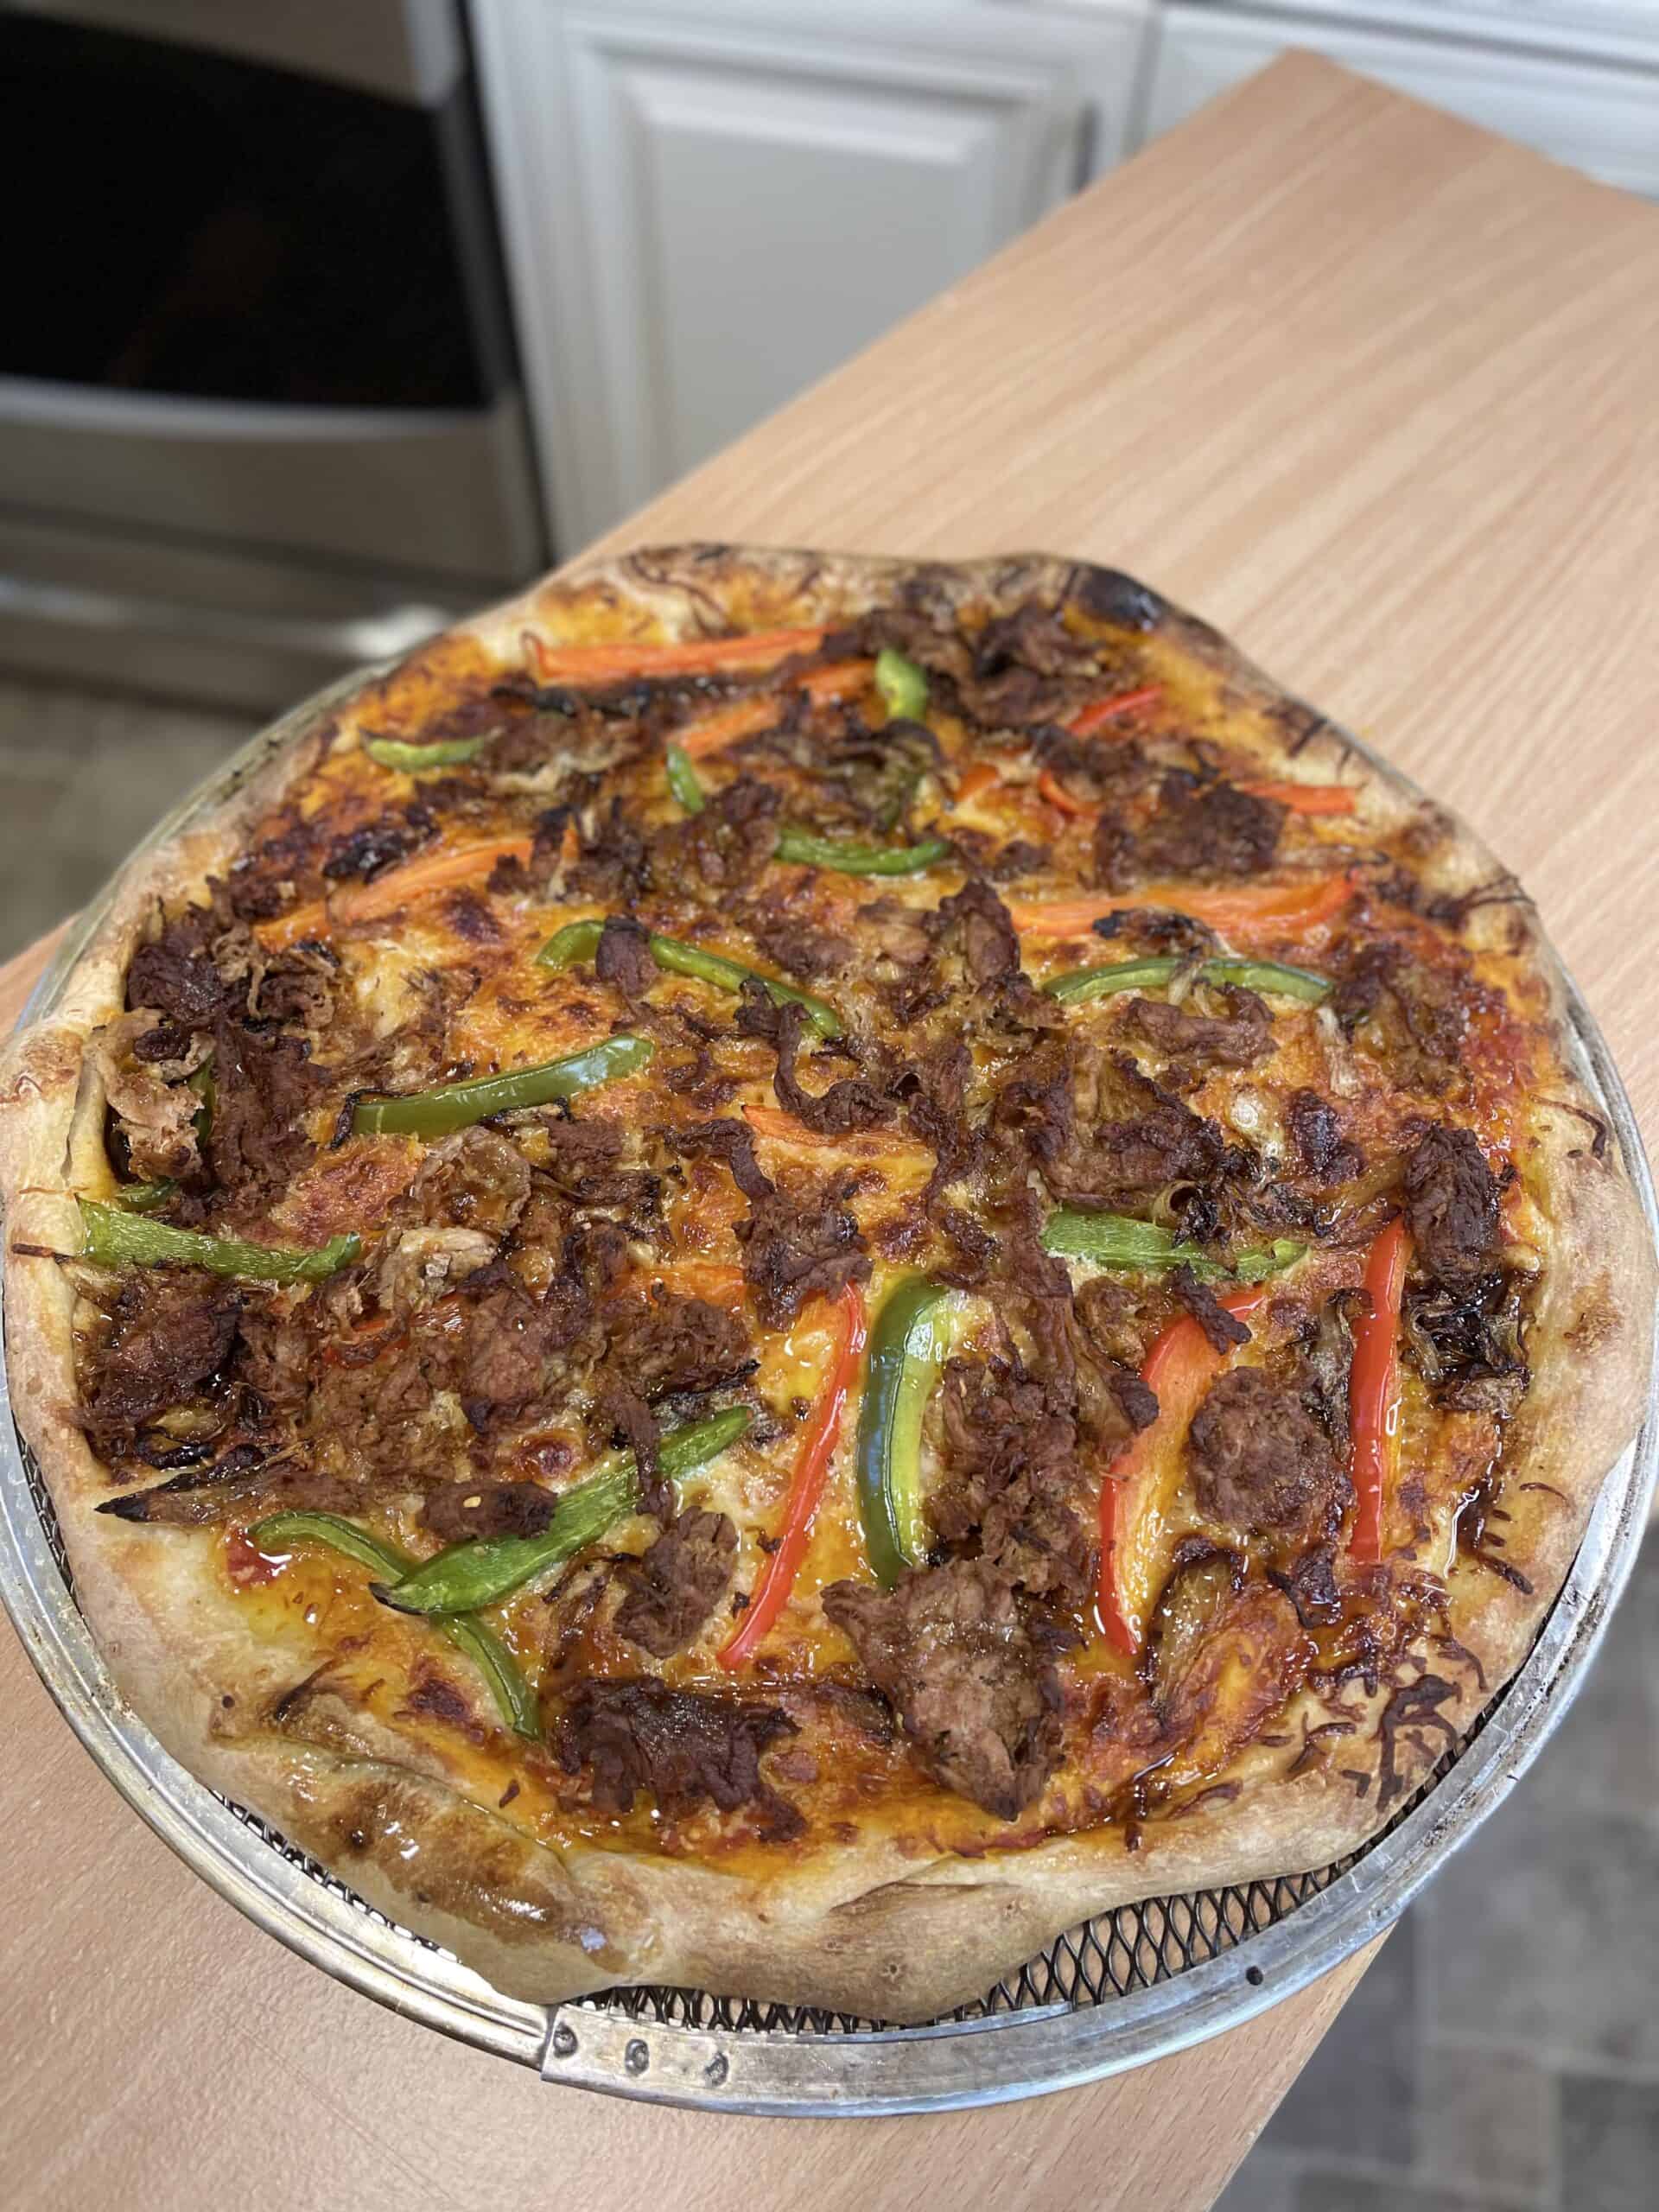 A pizza with meat and peppers on top of a metal pan.